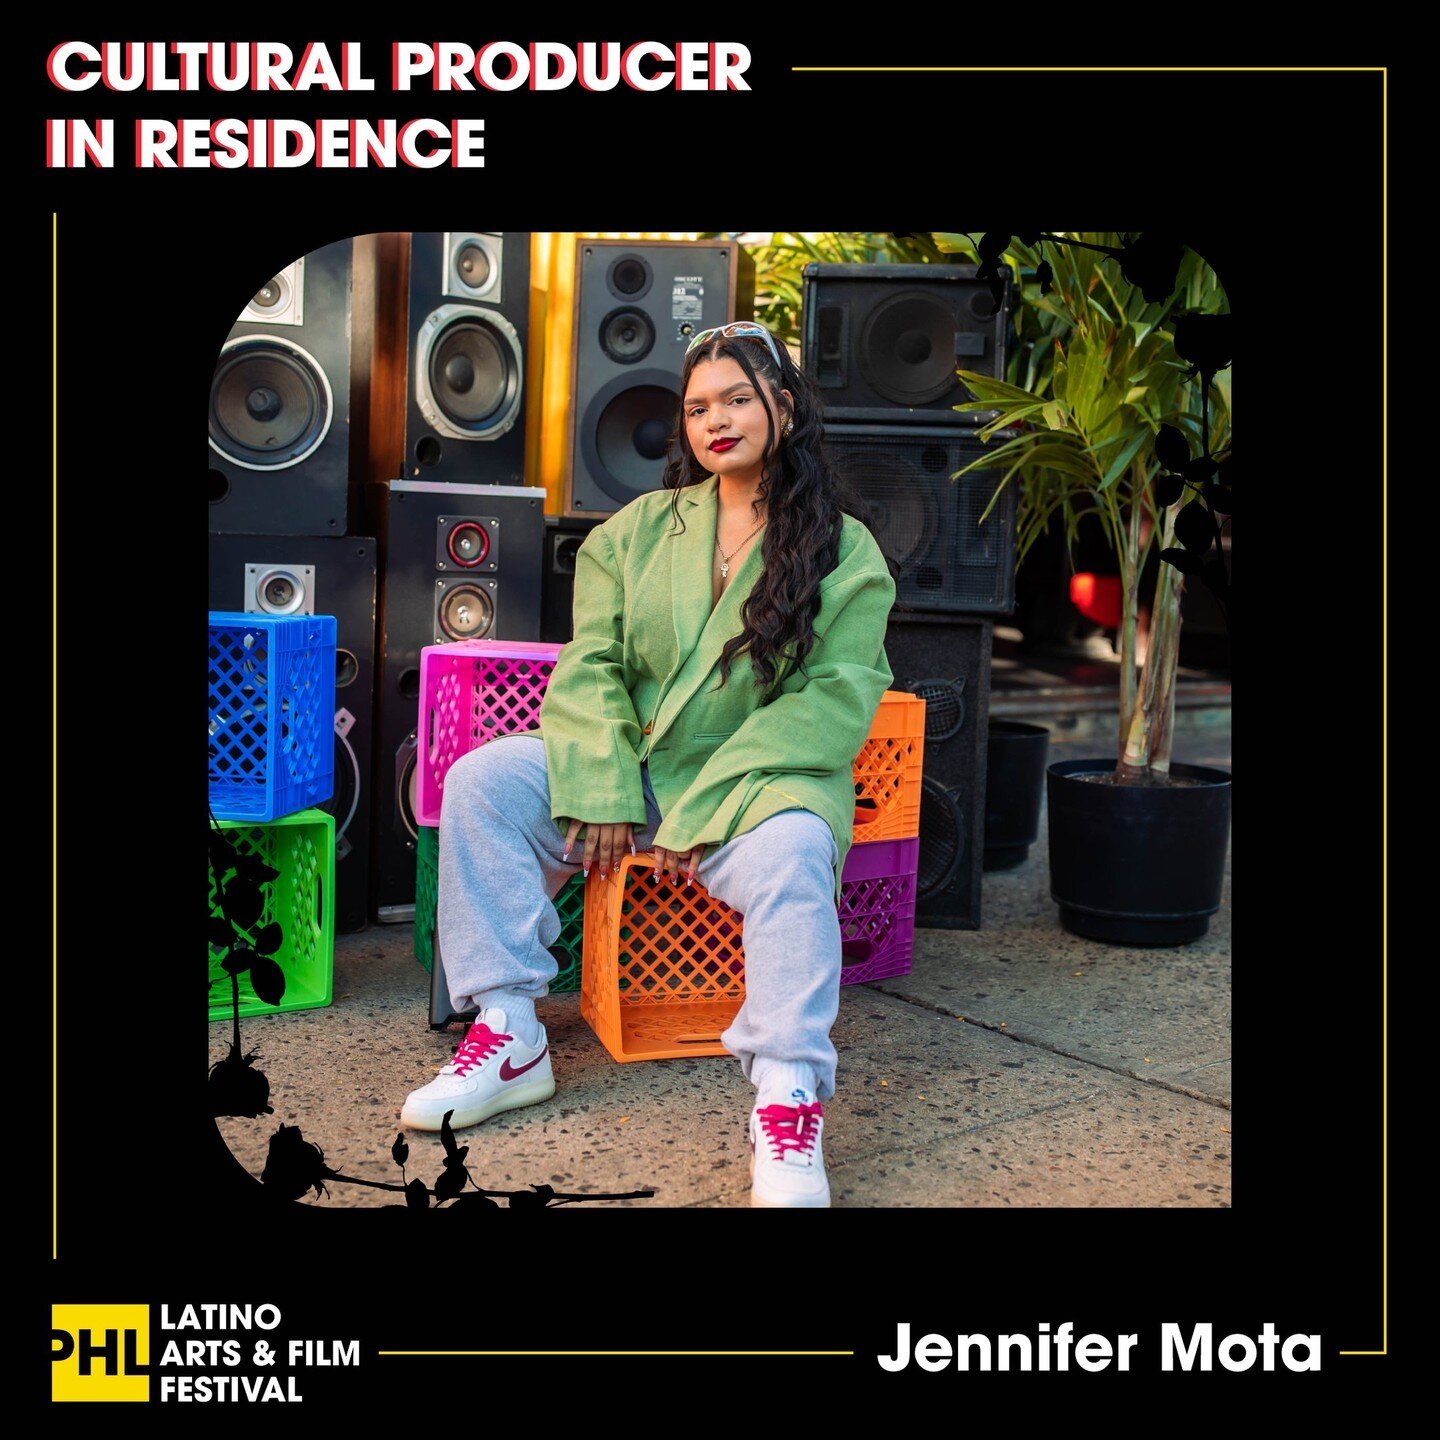 Hola Familia! We are so excited to welcome Jennifer Mota and Wilfredo Hernandez as our PHLAFF 2024 Cultural Producers in Residence! ⁠
⁠
The PHLAFF 2024 Cultural Producer Residency Program aims to nurture creative talent, promote cultural diversity, e